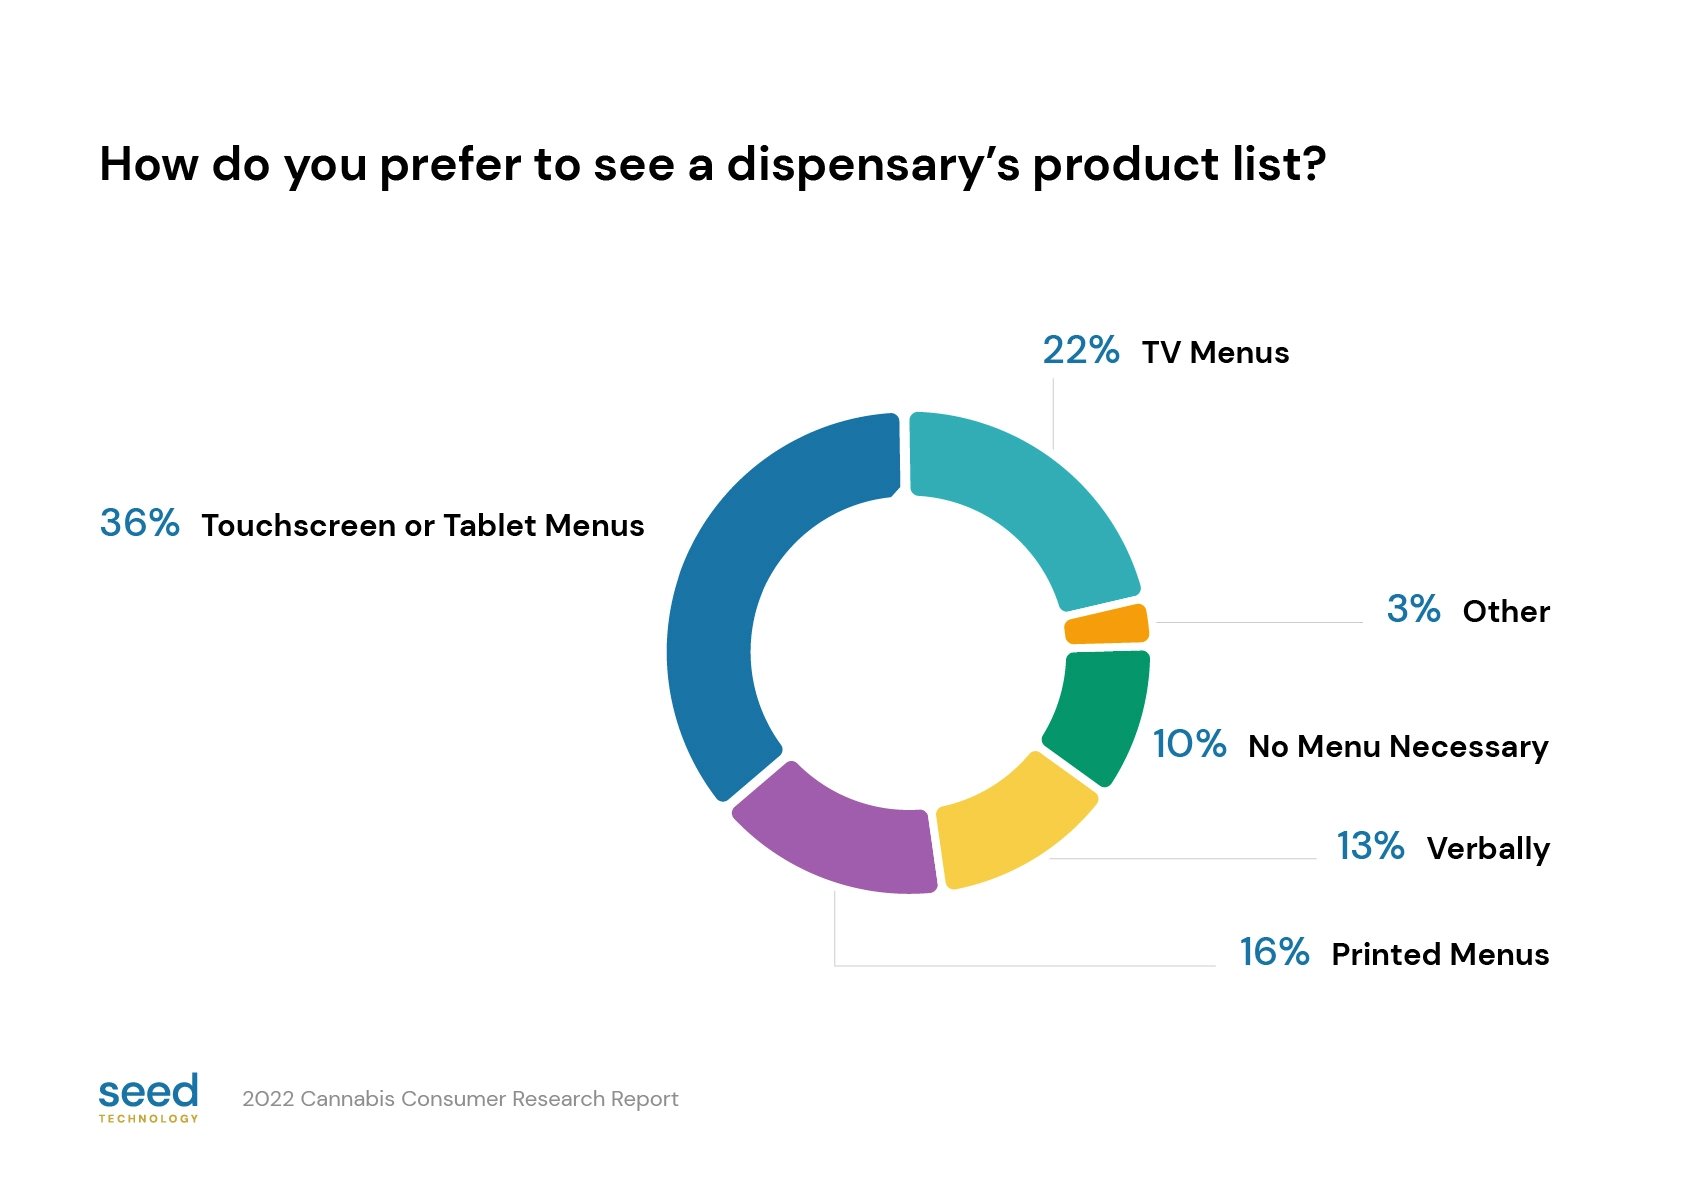 graph showing the breakdown of how people prefer to see dispensary product lists